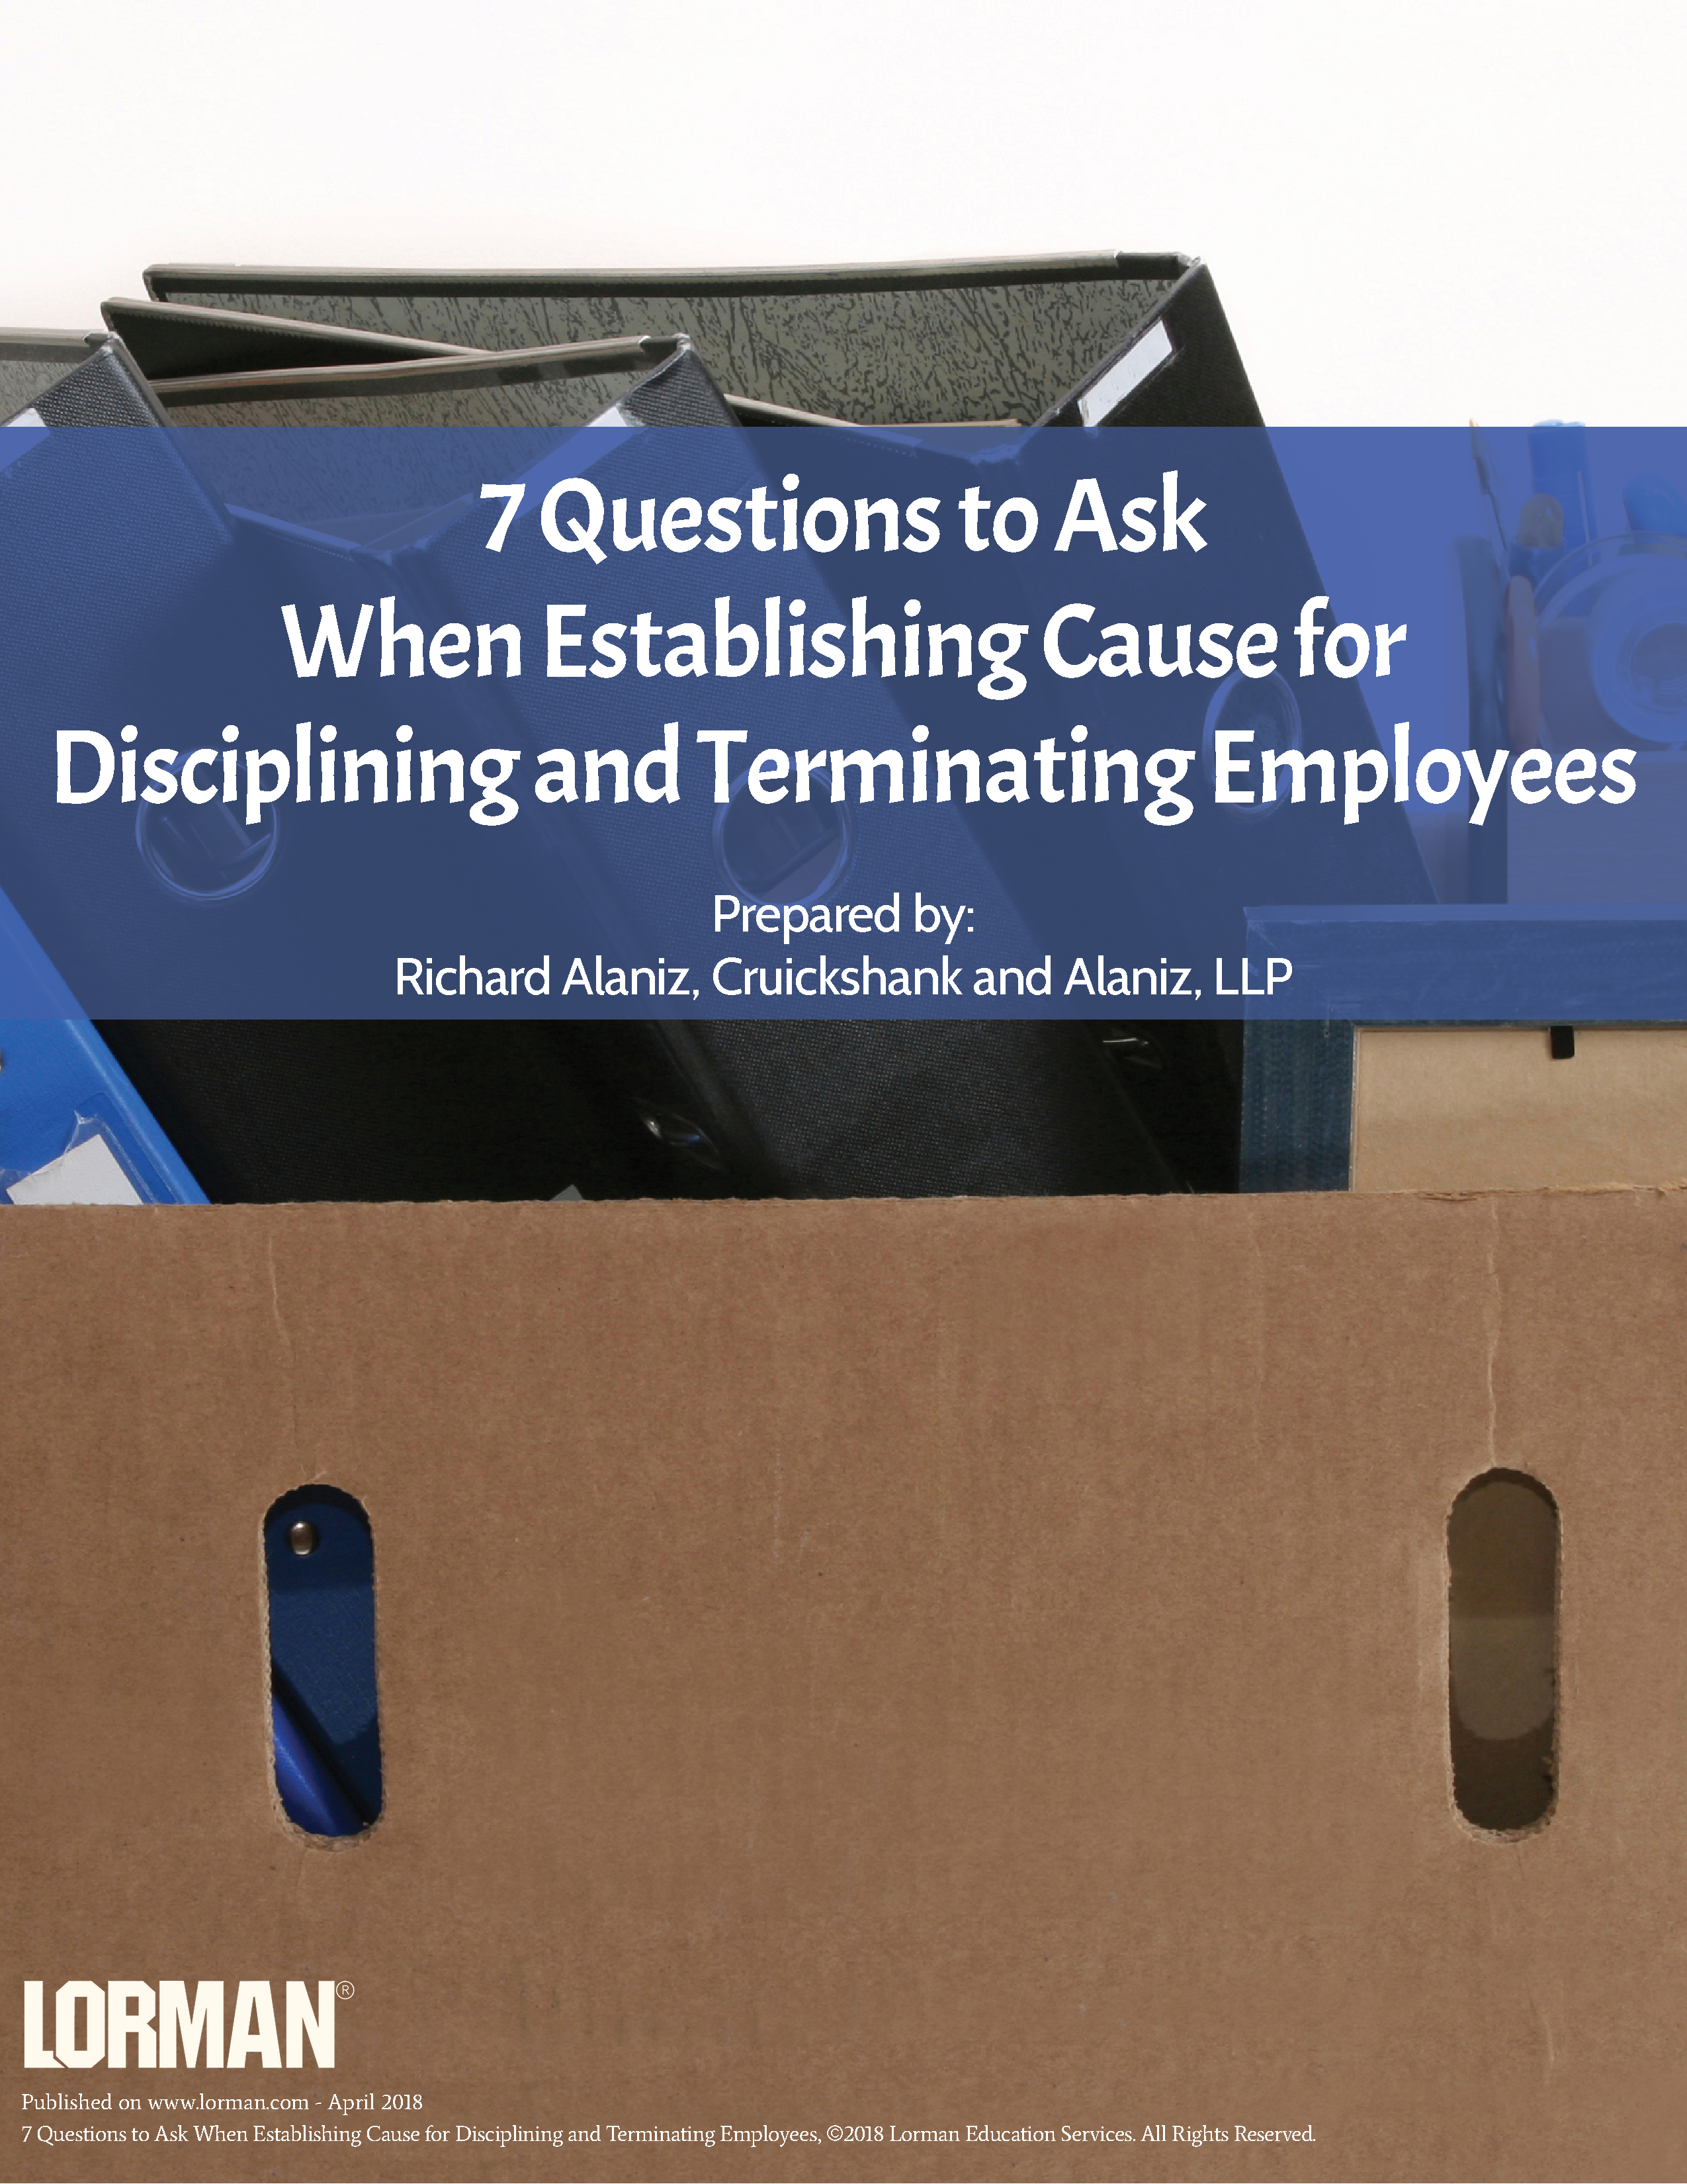 7 Questions to Ask When Establishing Cause for Disciplining and Terminating Employees